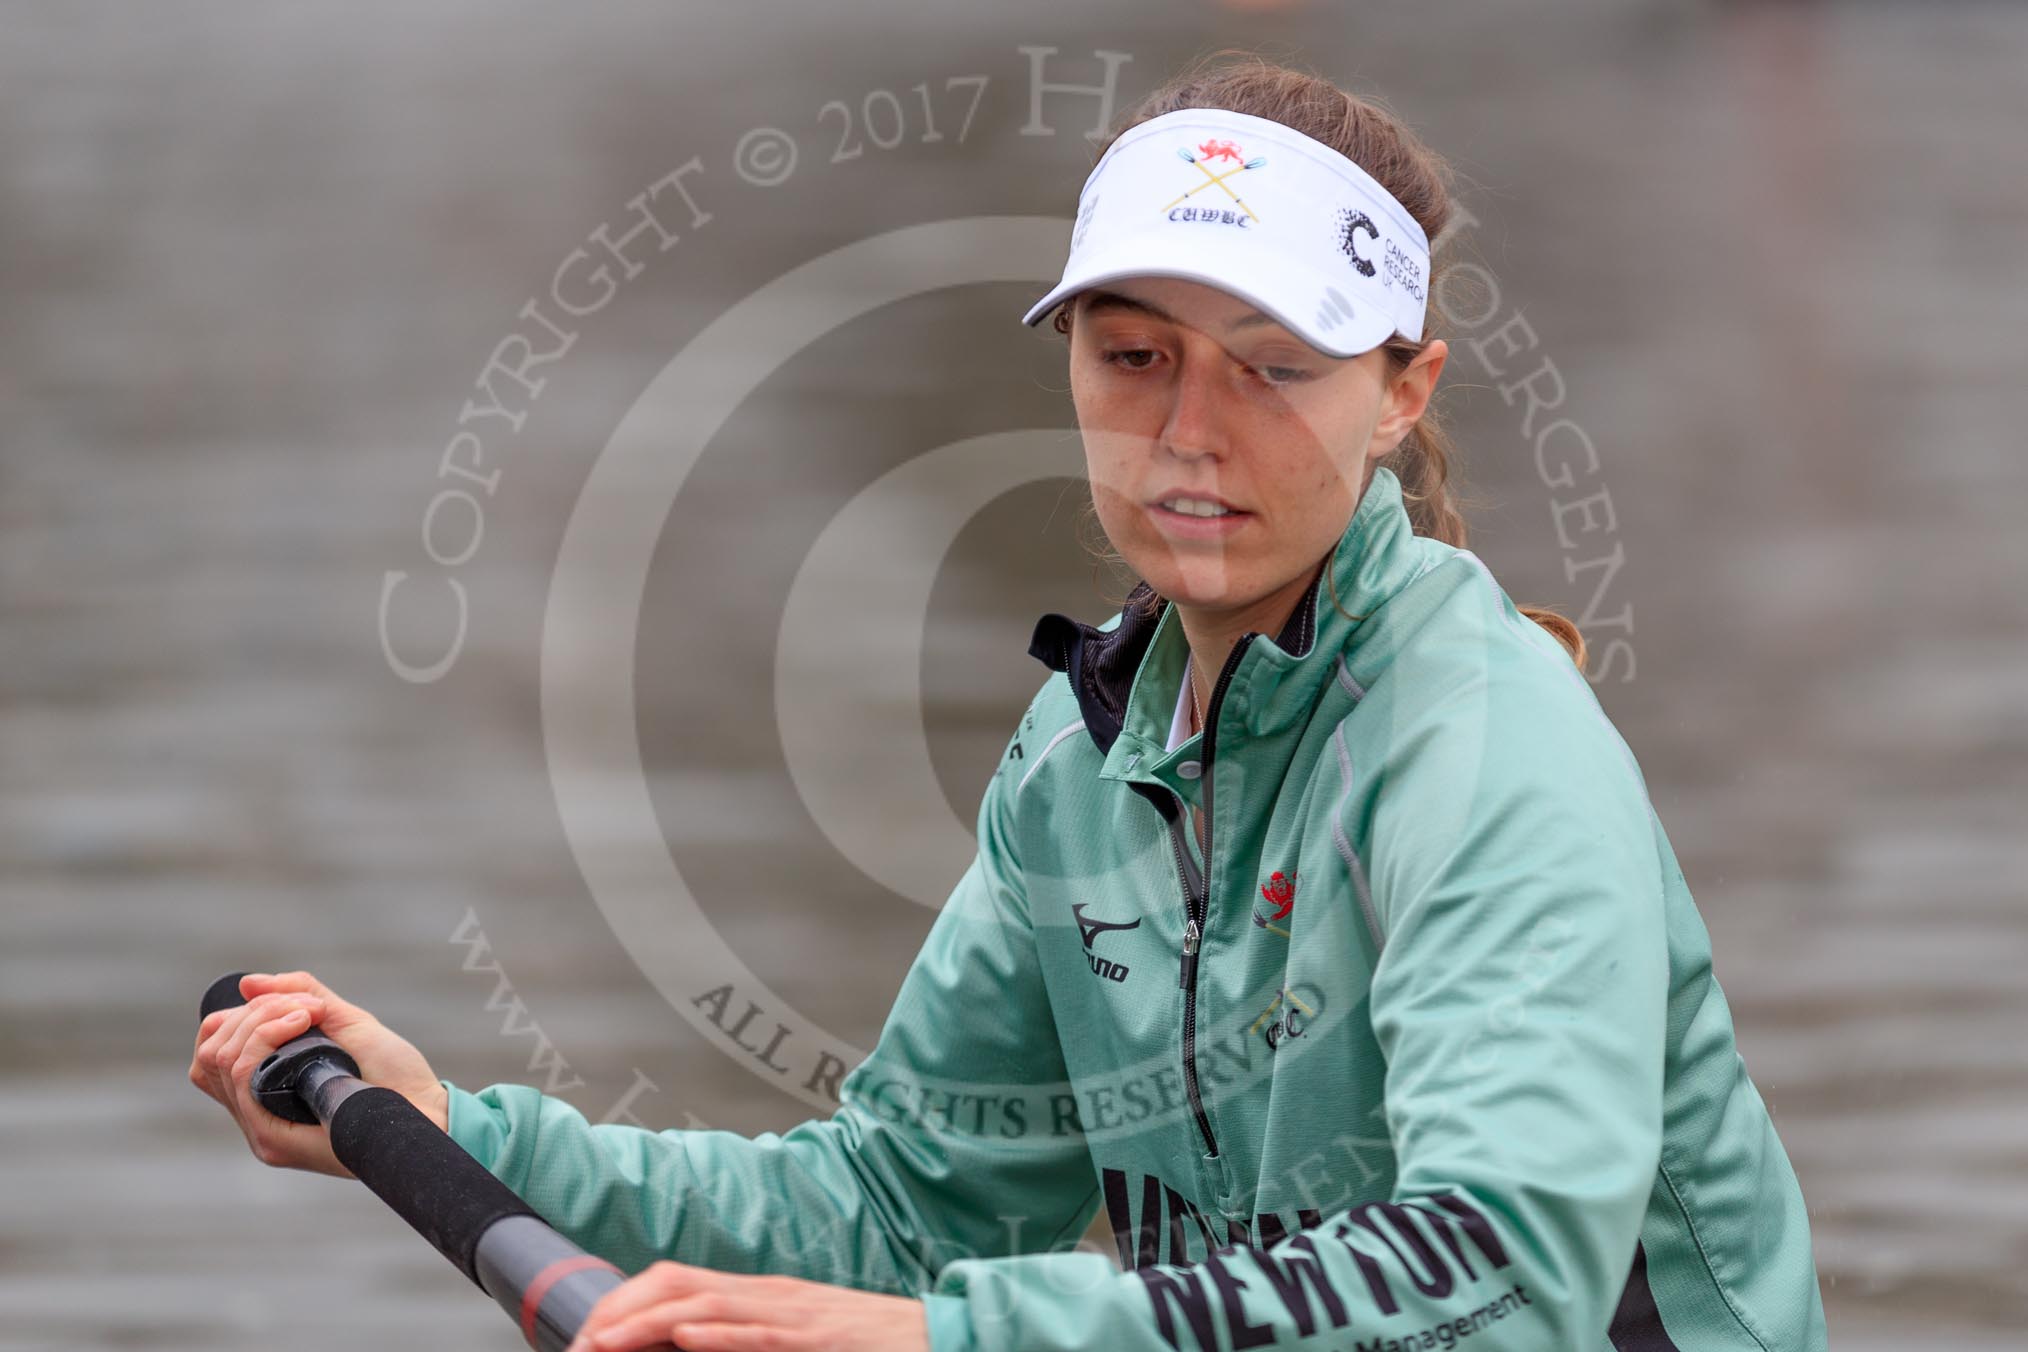 The Cancer Research UK Women's Boat Race 2018: Kelsey Barolak, 3 seat for Cambridge.
River Thames between Putney Bridge and Mortlake,
London SW15,

United Kingdom,
on 24 March 2018 at 15:48, image #128